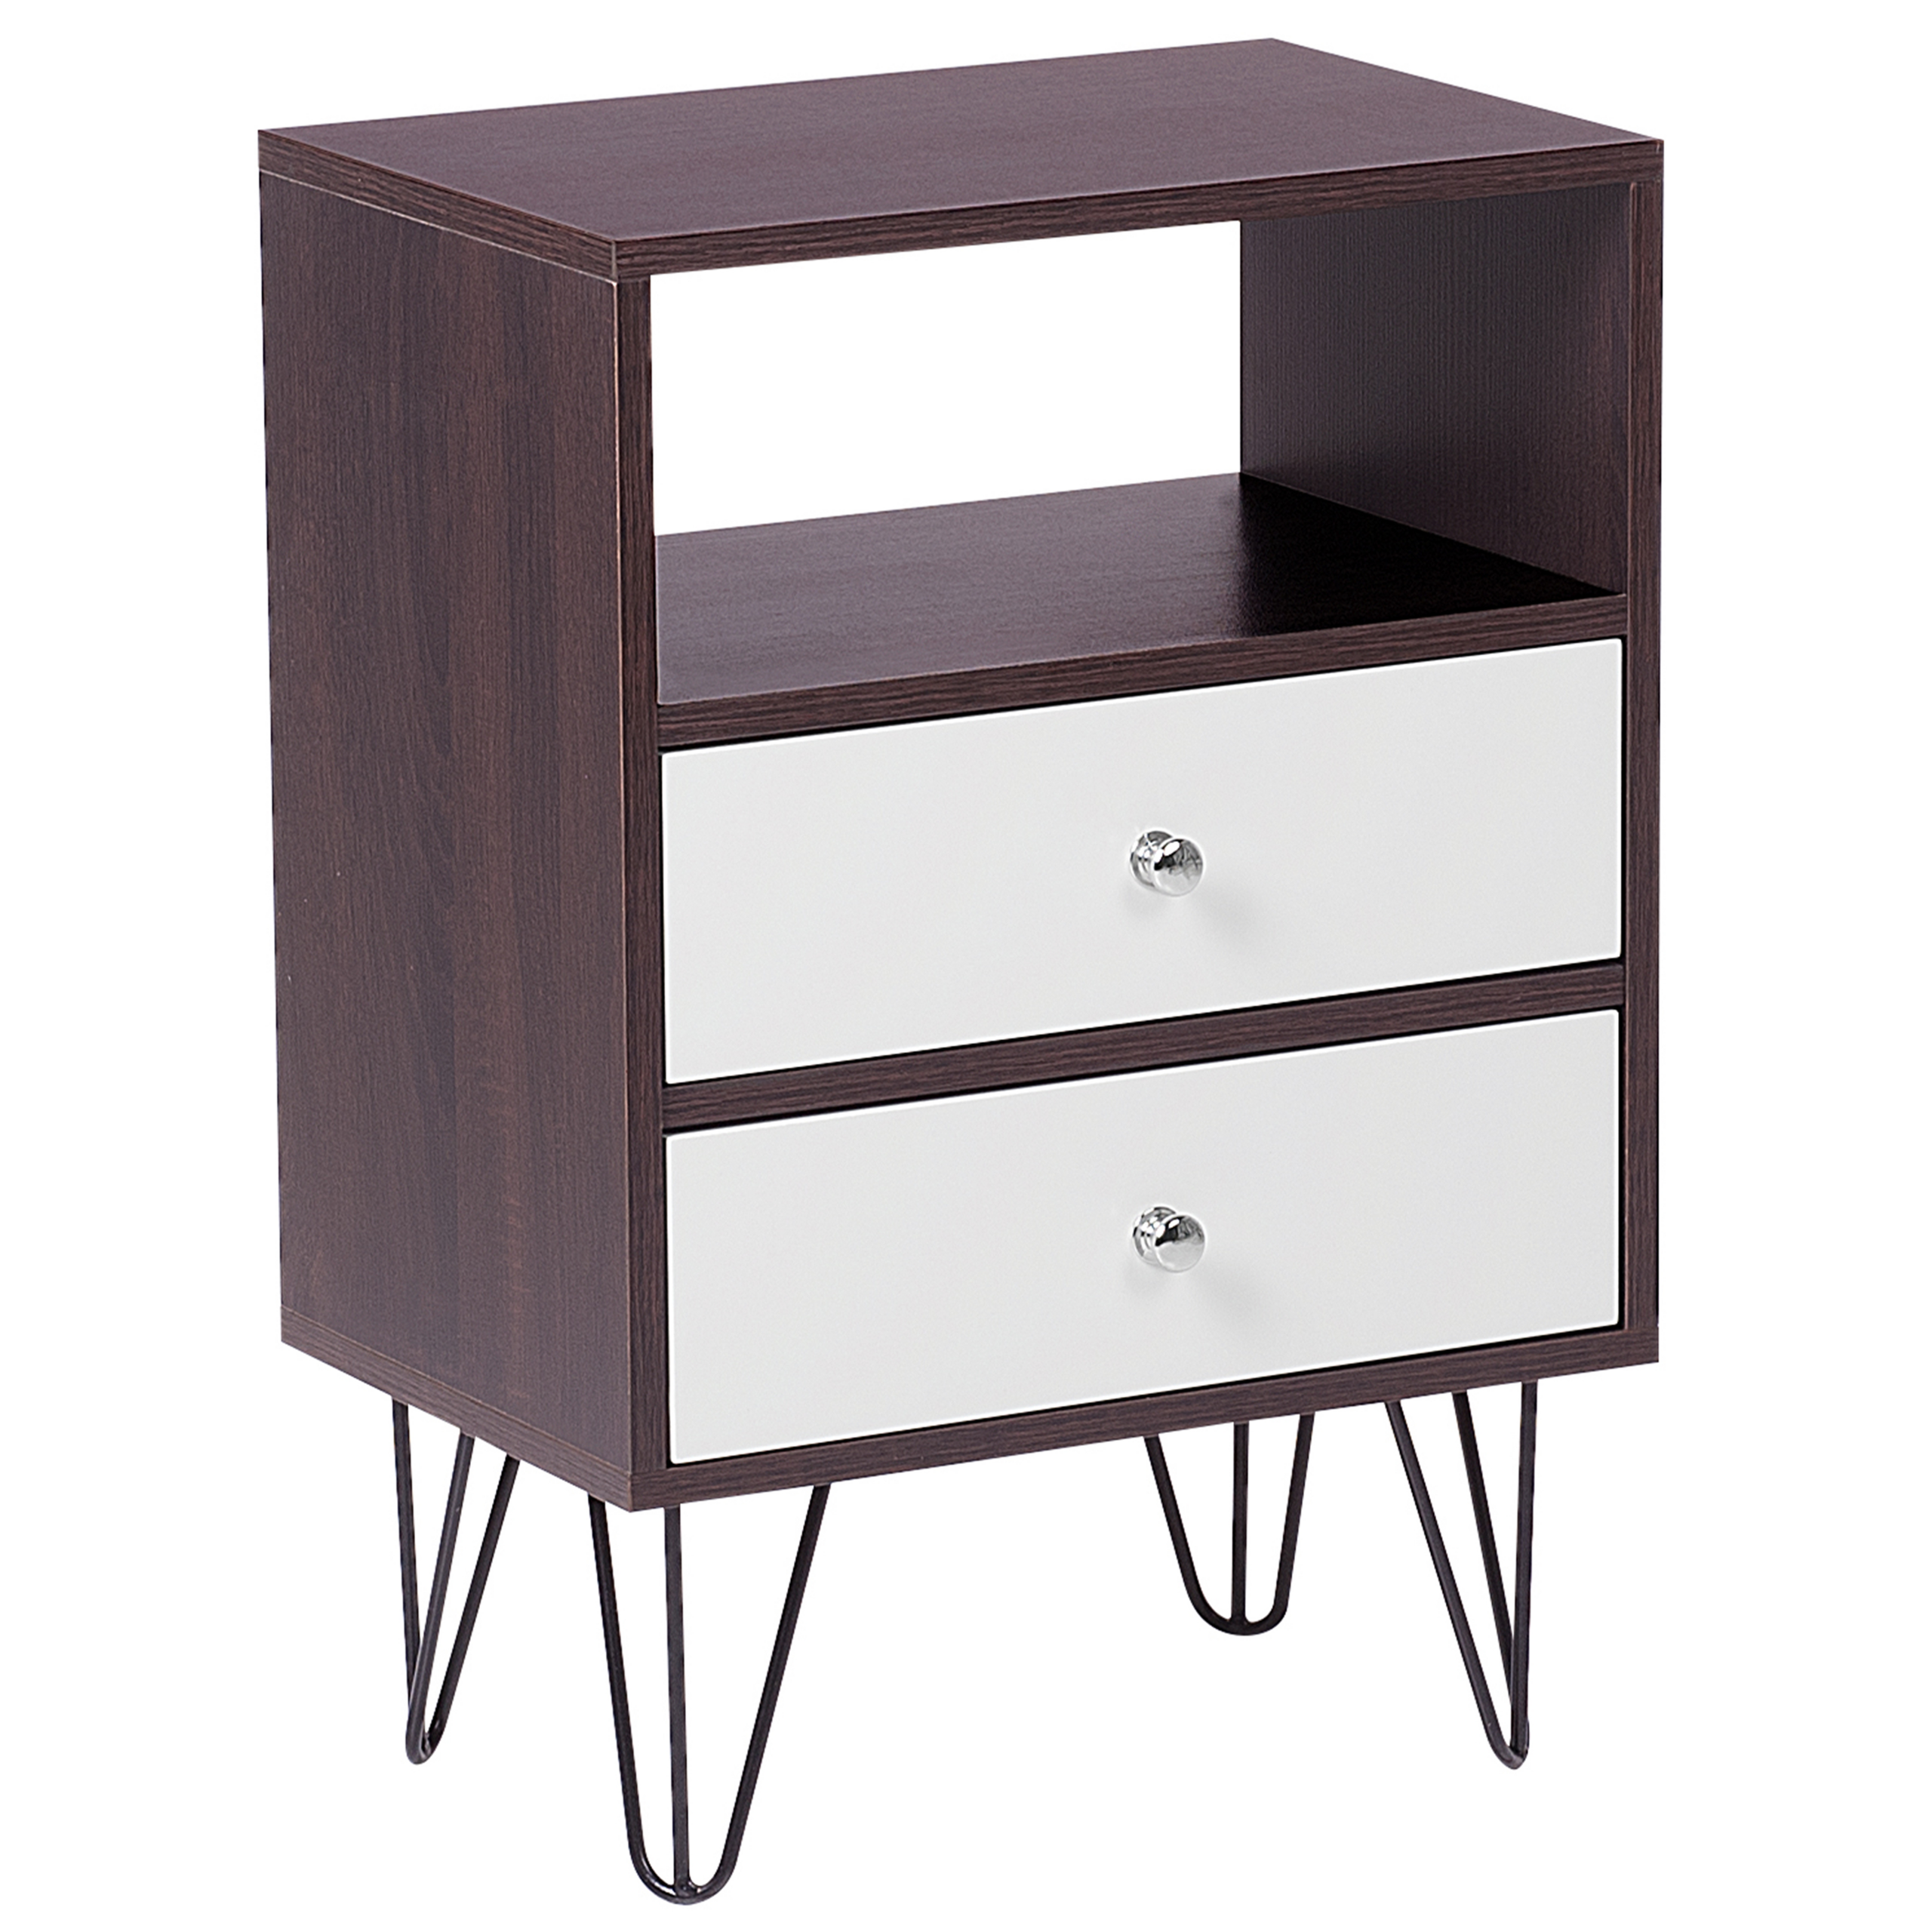 Beliani Bedside Table Nightstand Dark Wood with White 2 Drawers Manufactured Wood Modern Design